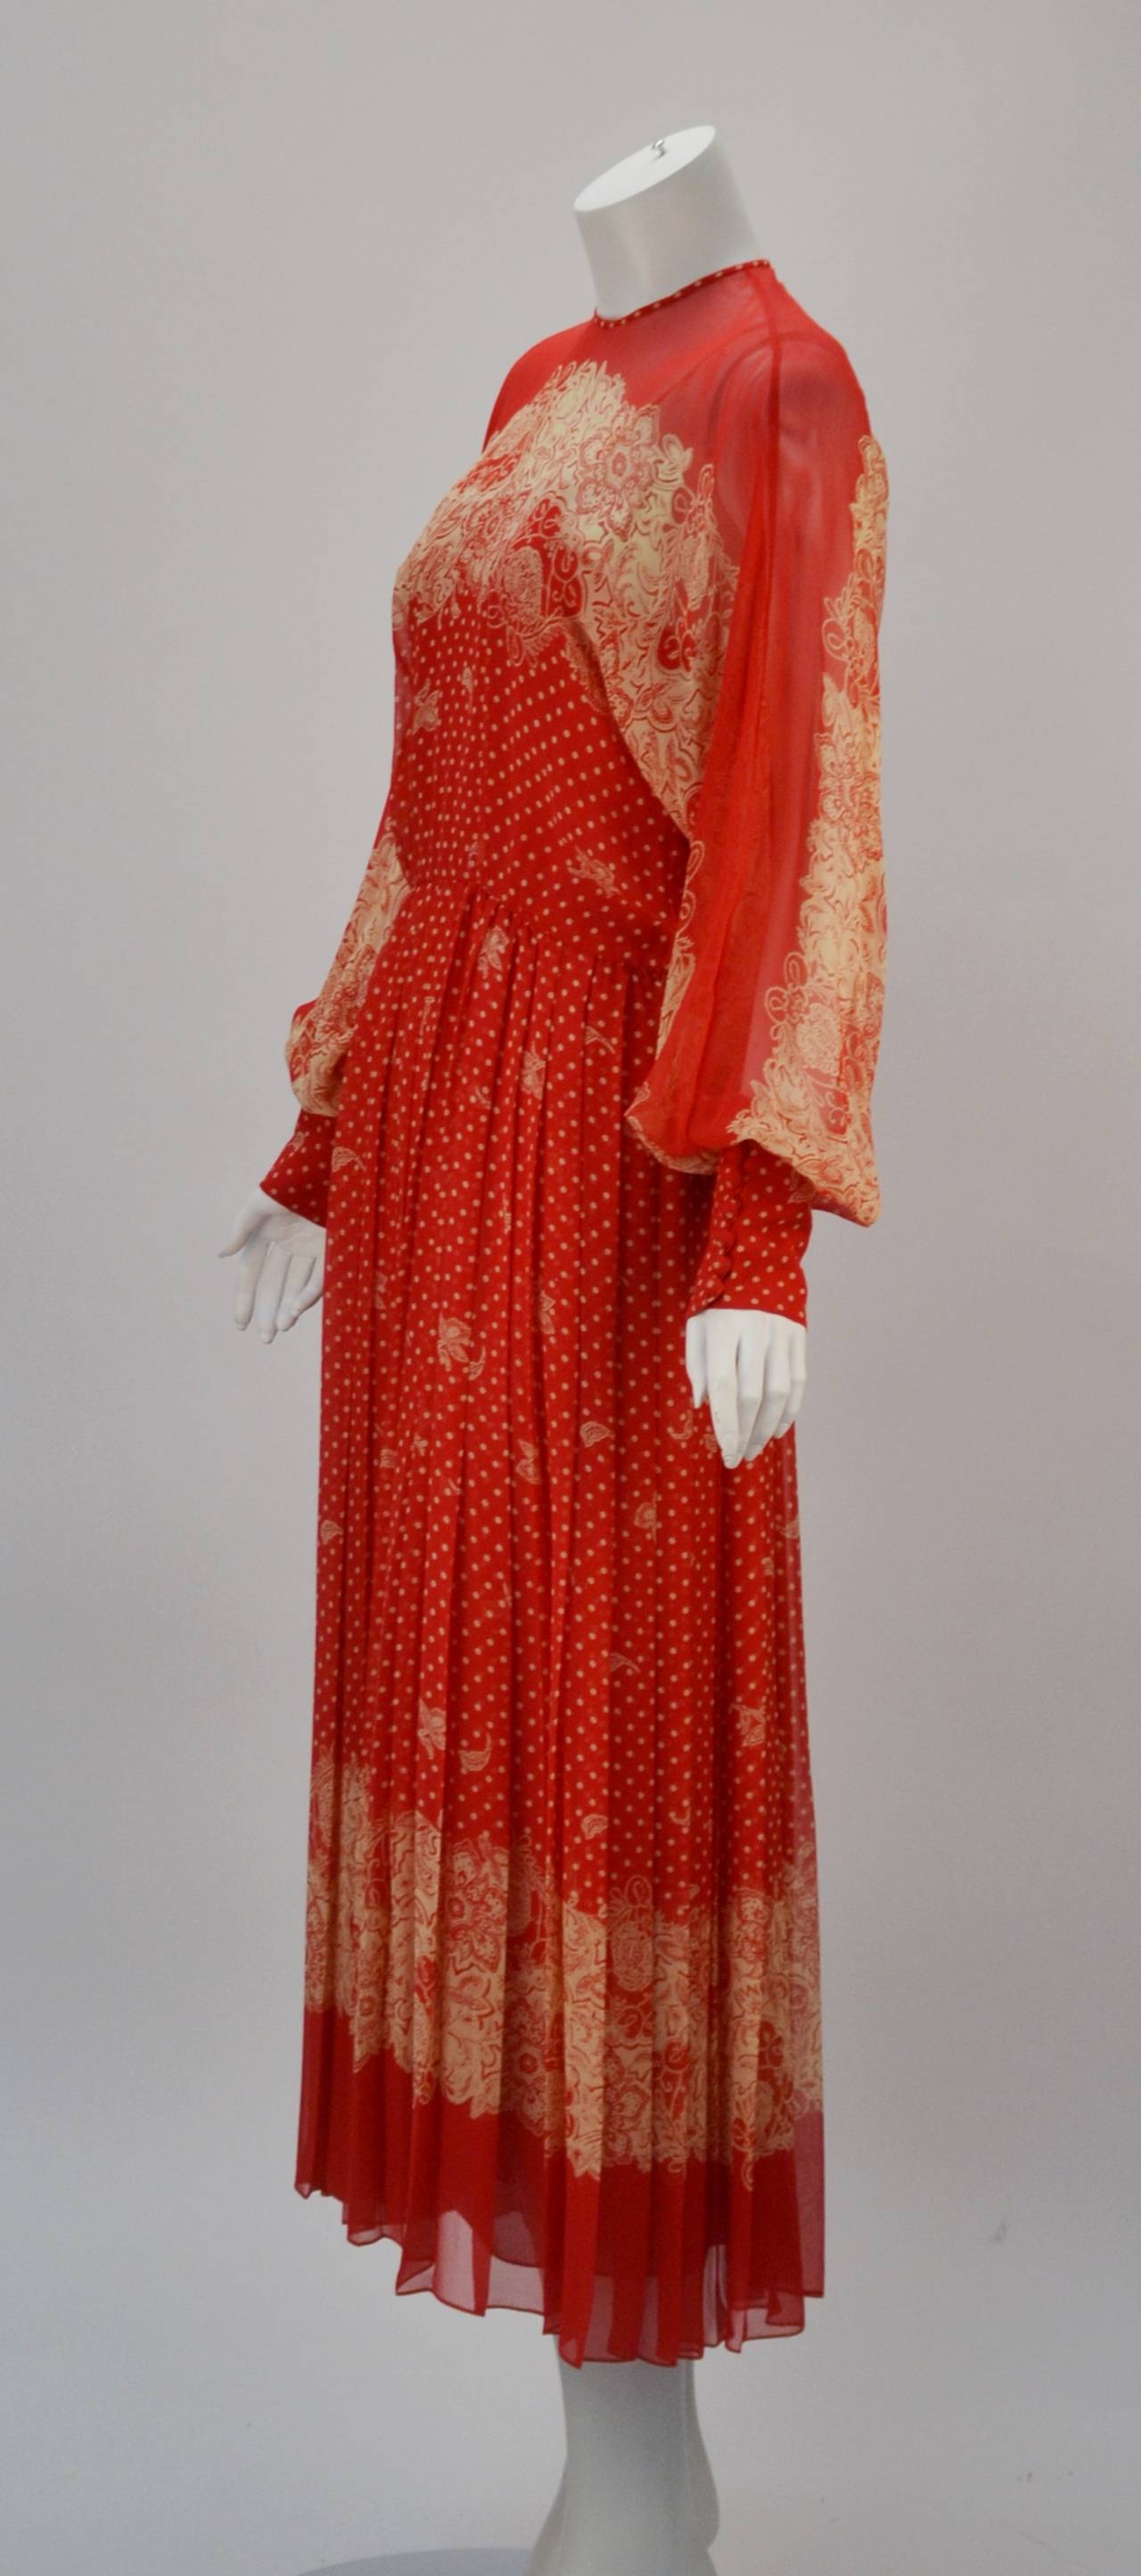 1980's silk Adele Simpson red with beige polka dot and floral print long sleeve dress. The dress appears sheer, but also has an attached slip, which is also sheer in its own right. The dolman sleeves have wide cuffs that fasten with fabric covered